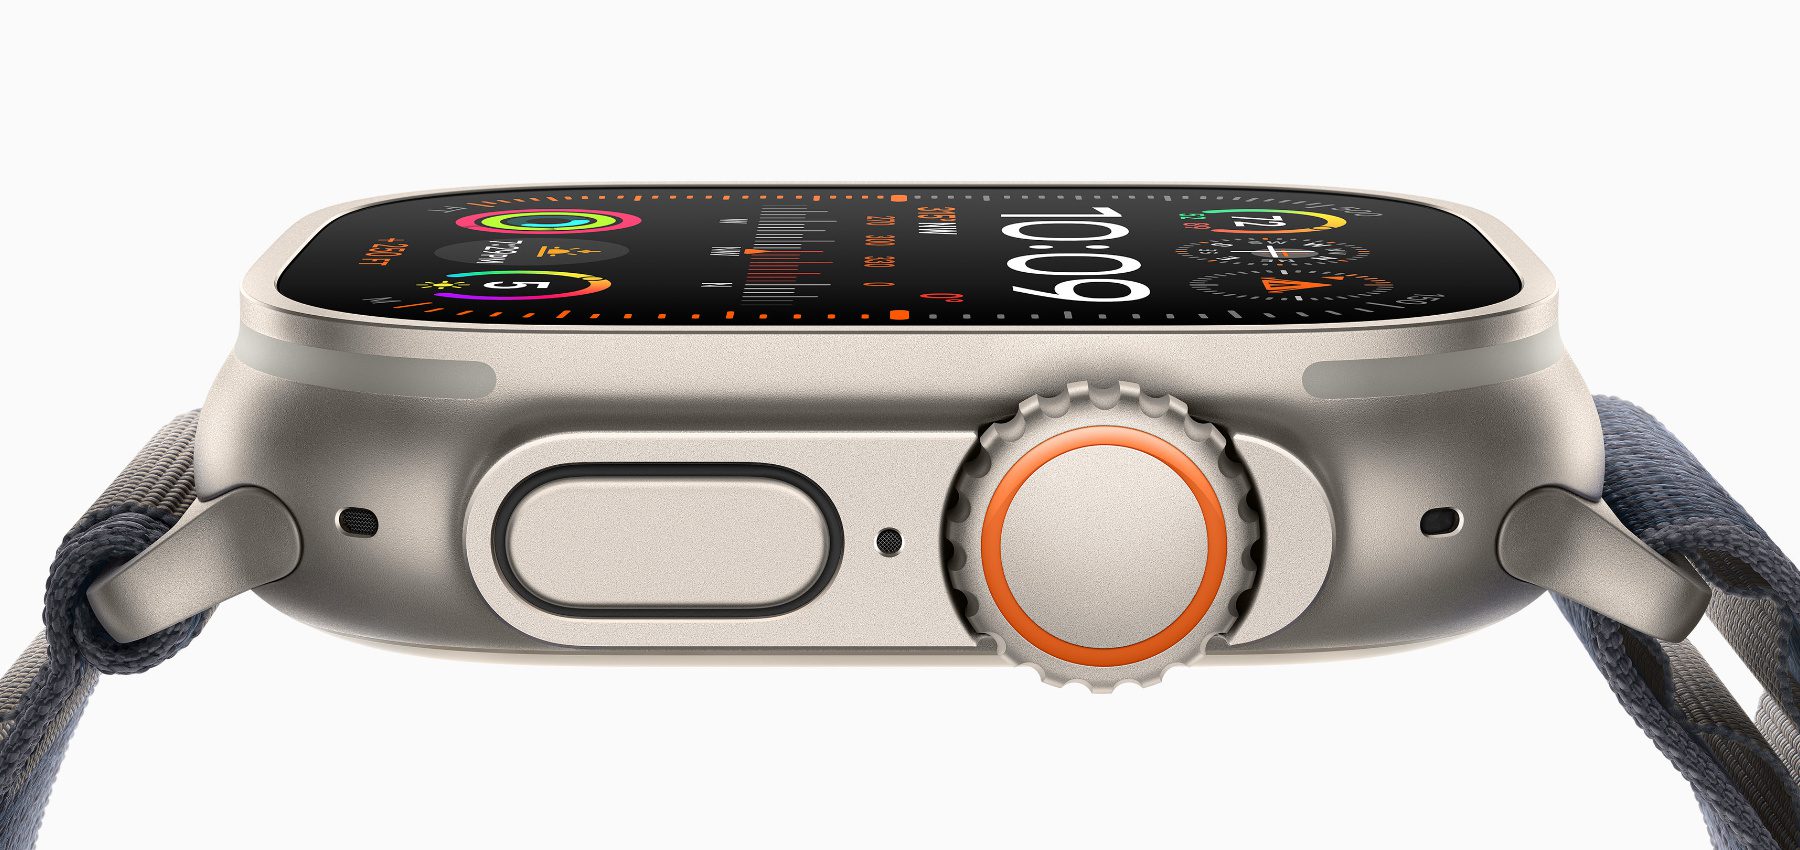 Apple Watch Ultra - Technical Specifications